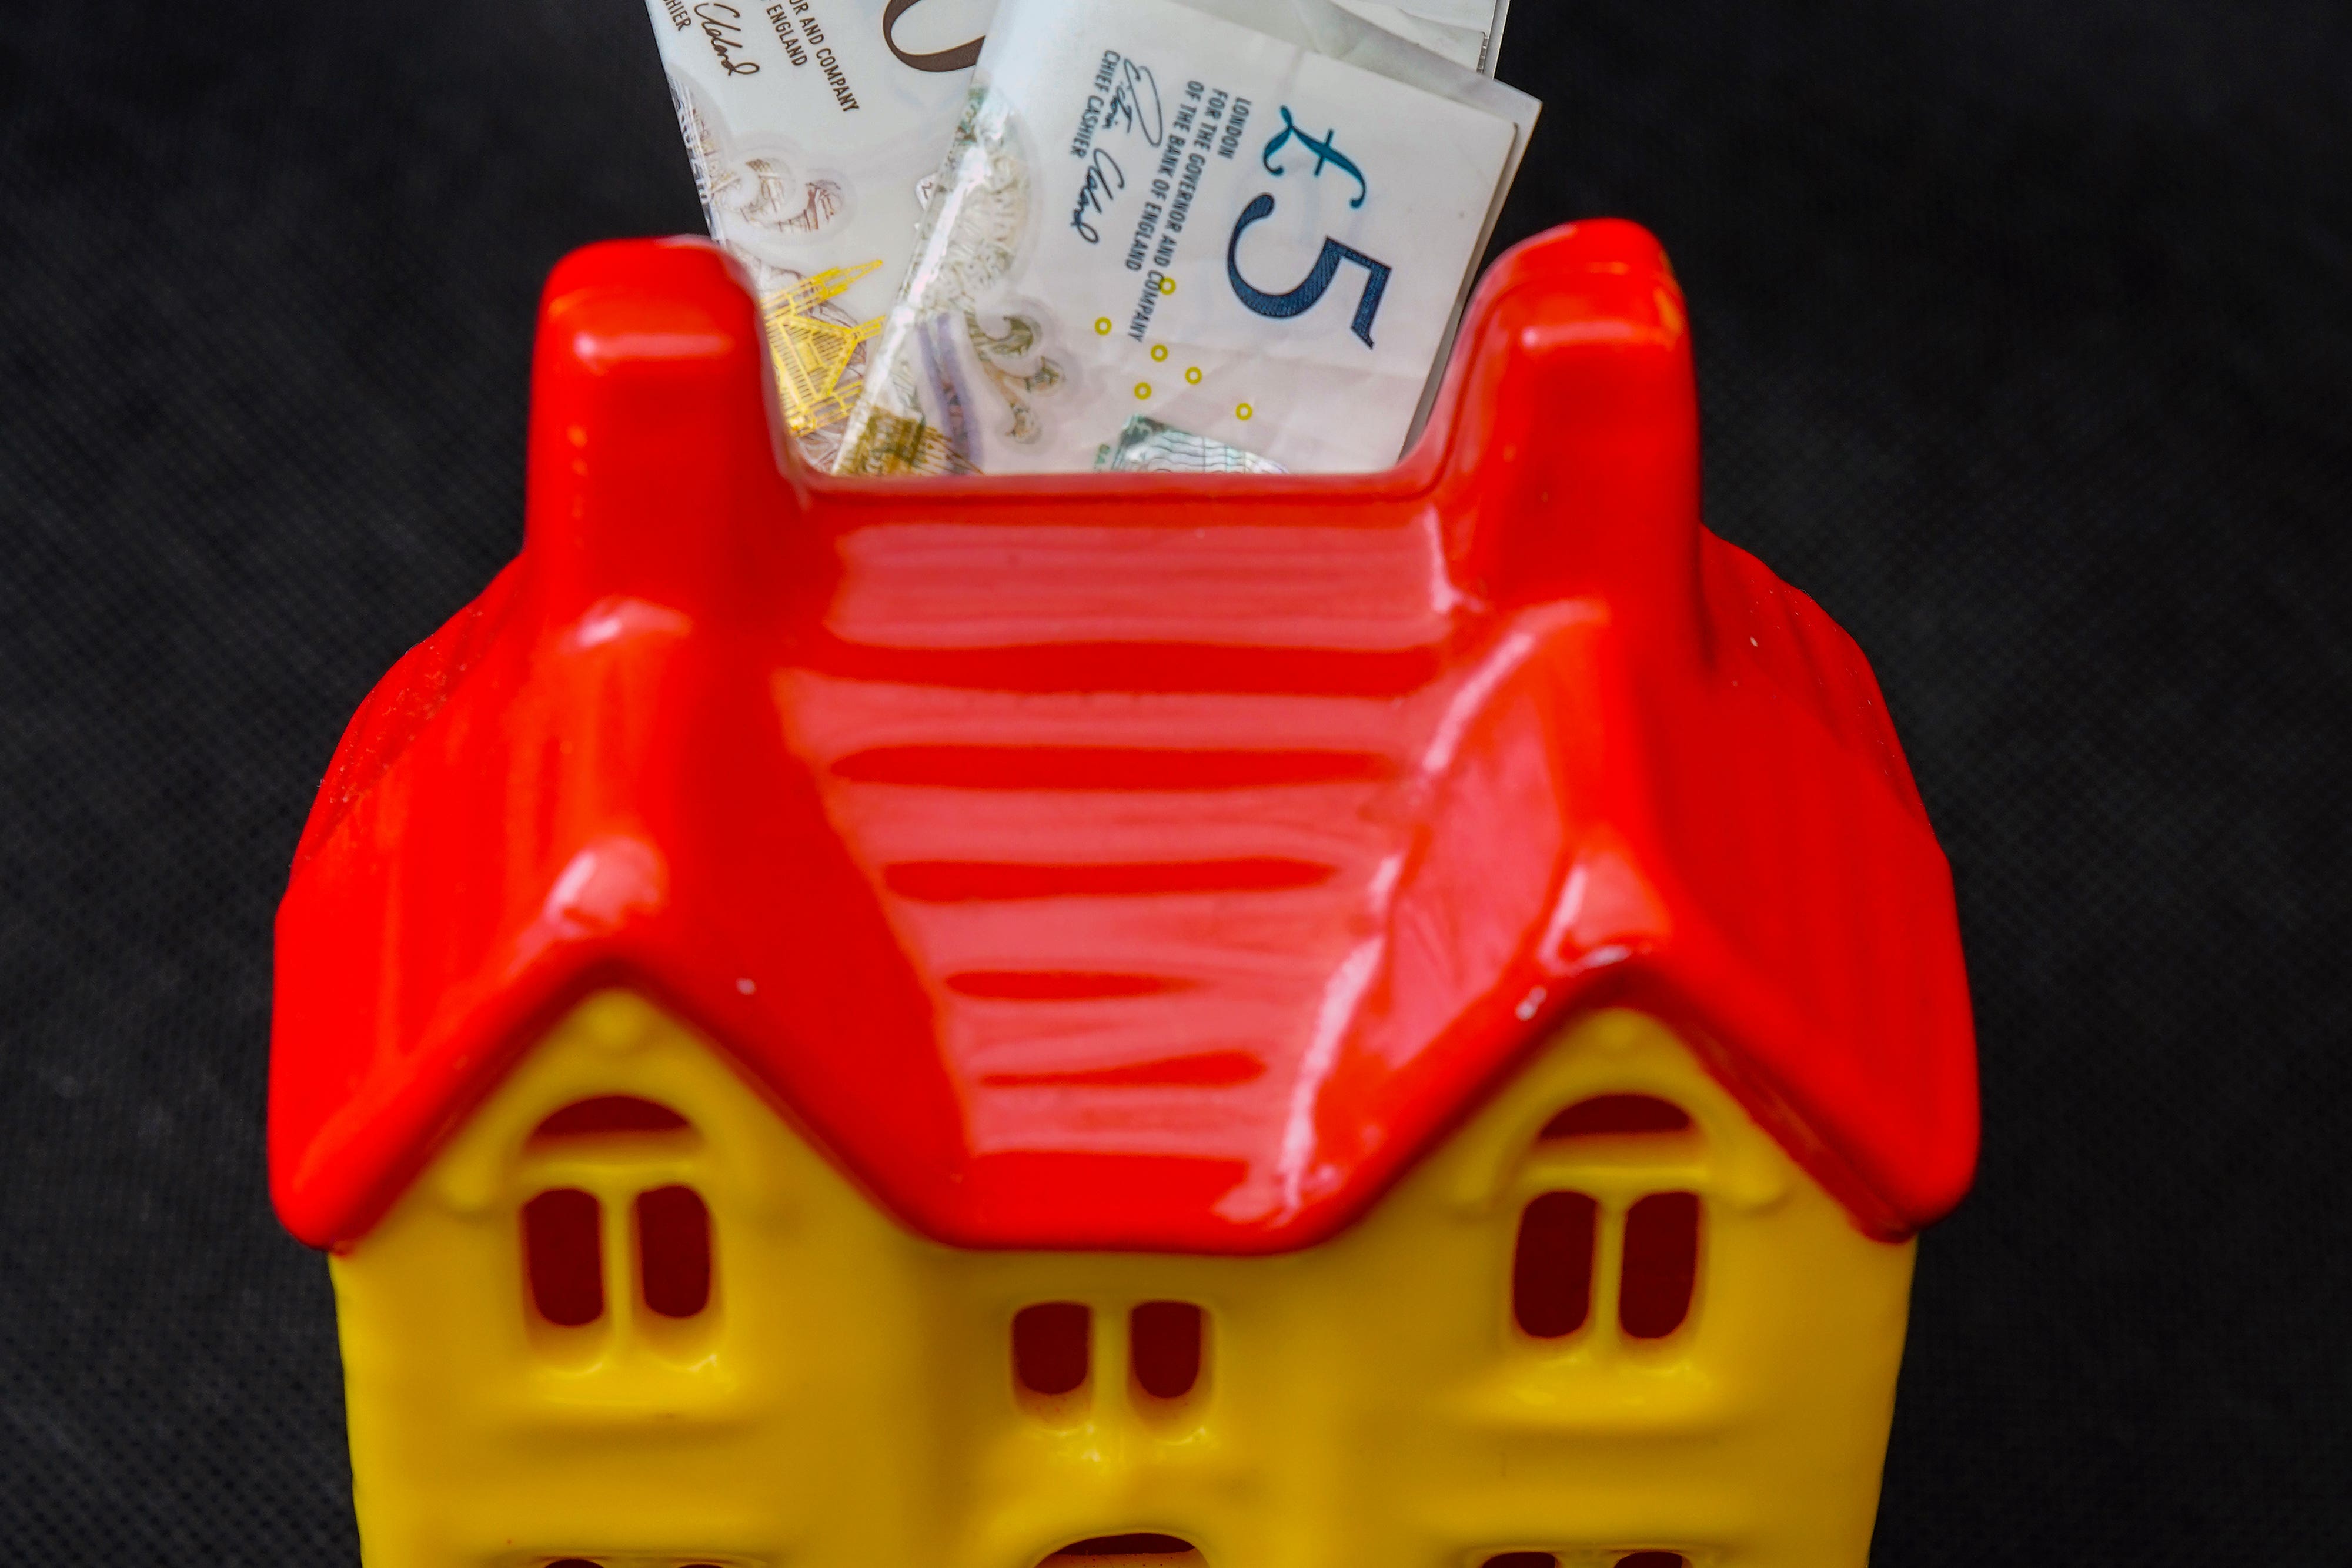 UK home insurance prices set to jump after dire year for underwriters